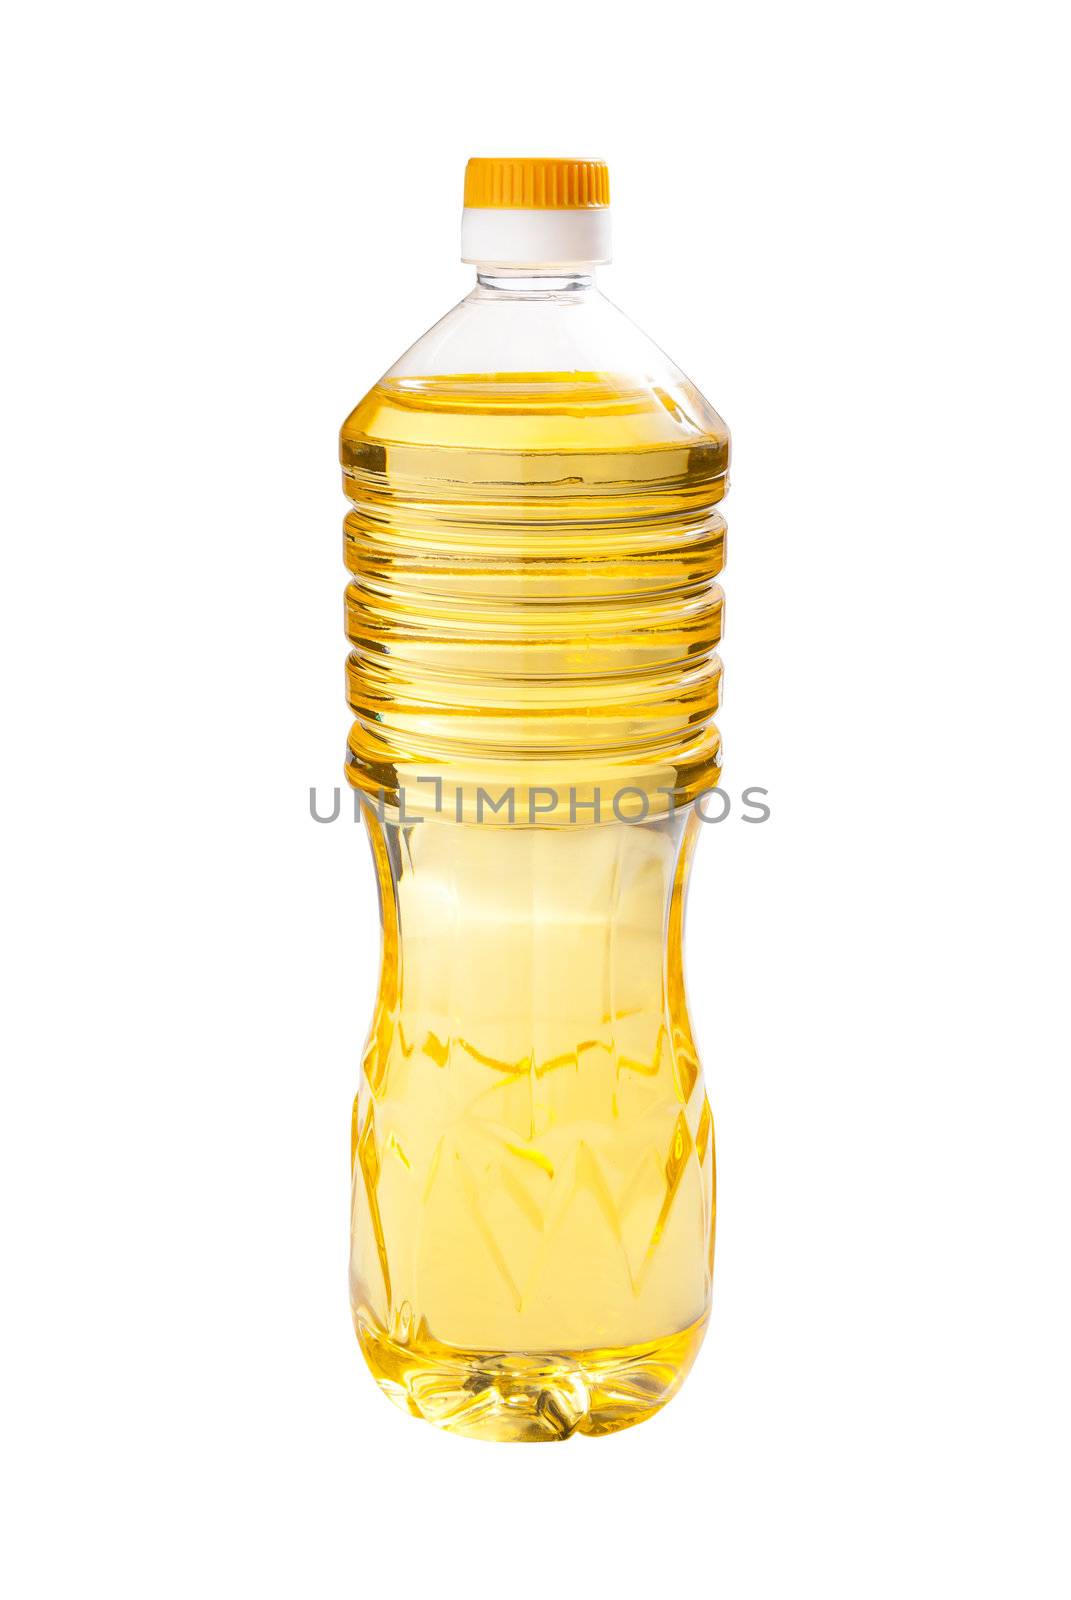 Sunflower oil in the transparent bottles isolated on white background